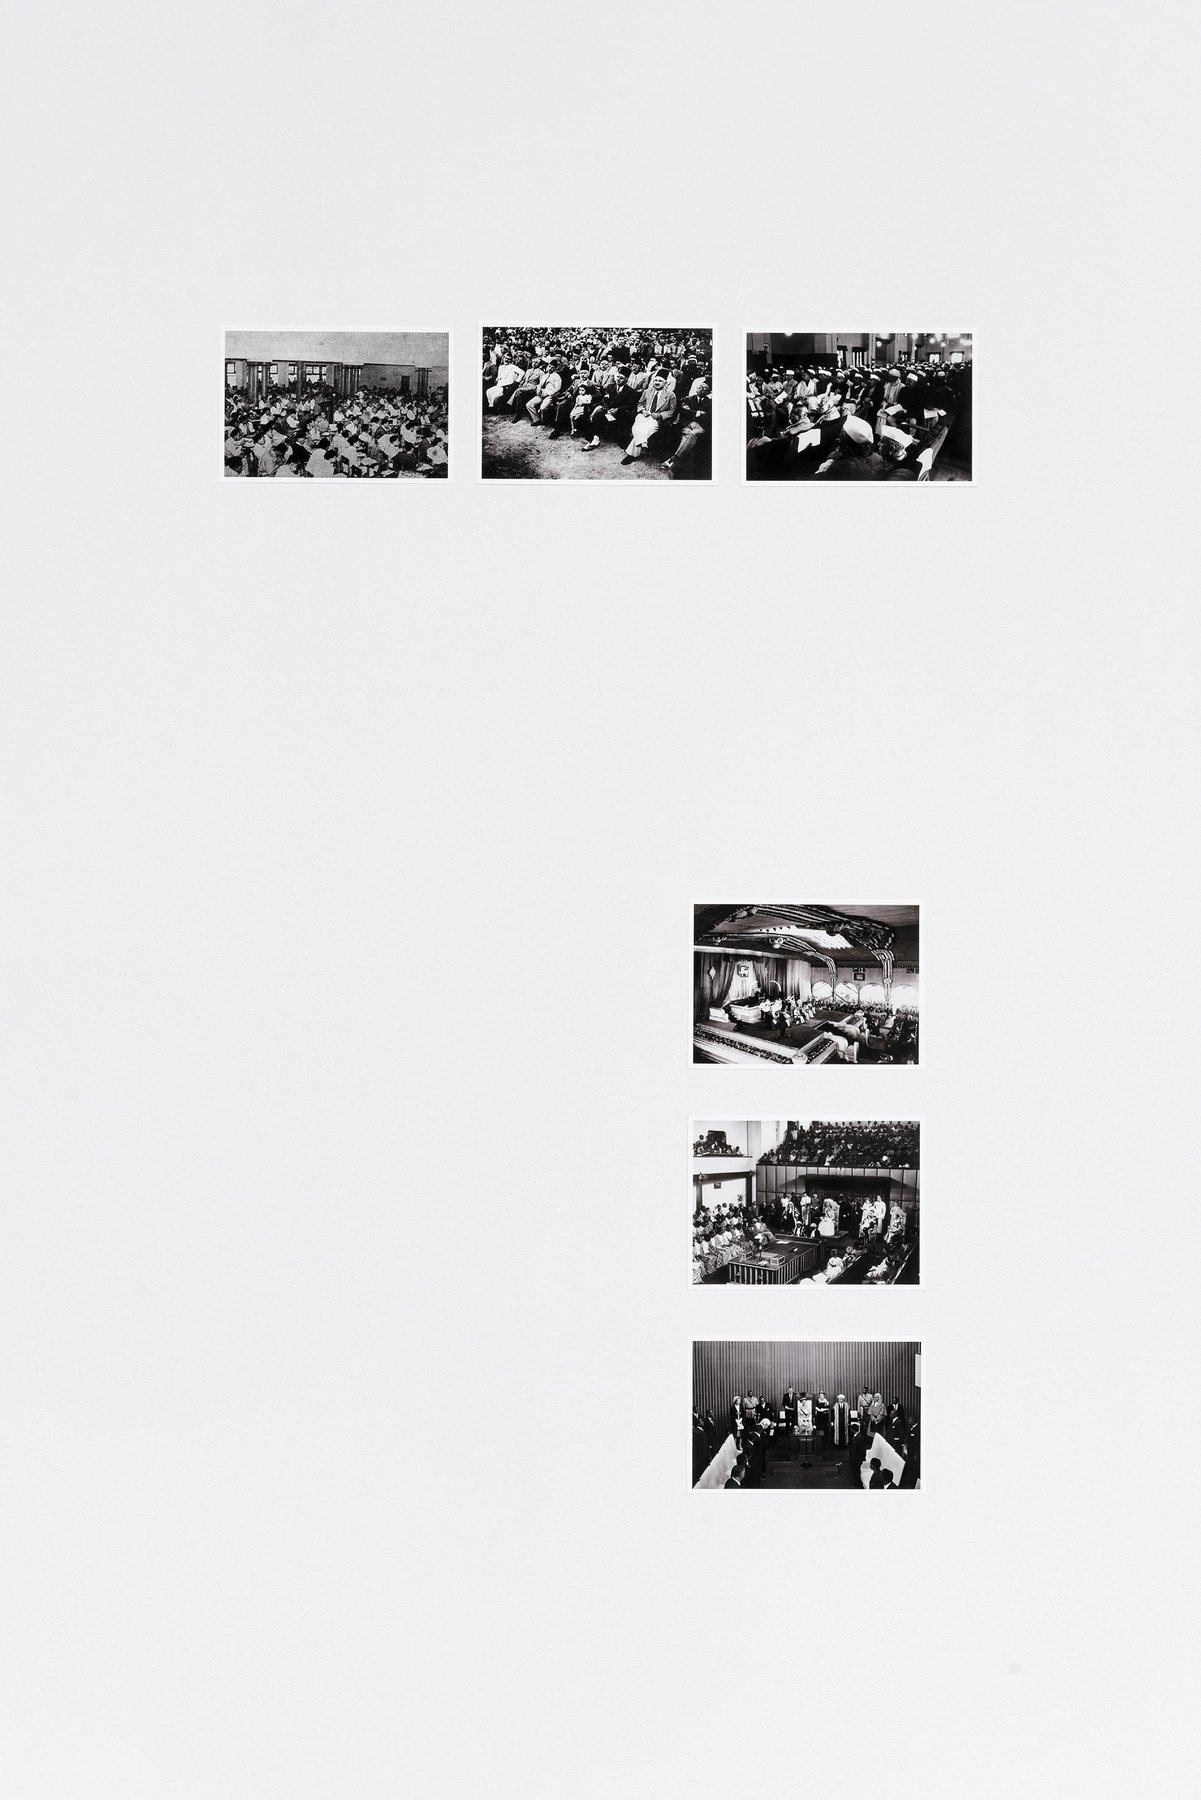 Independence Day 1934-1975, 2009-... 60+ black & white photos, each photo approximately about A5 size (14.8 x 21 cm), archival inkjet prints